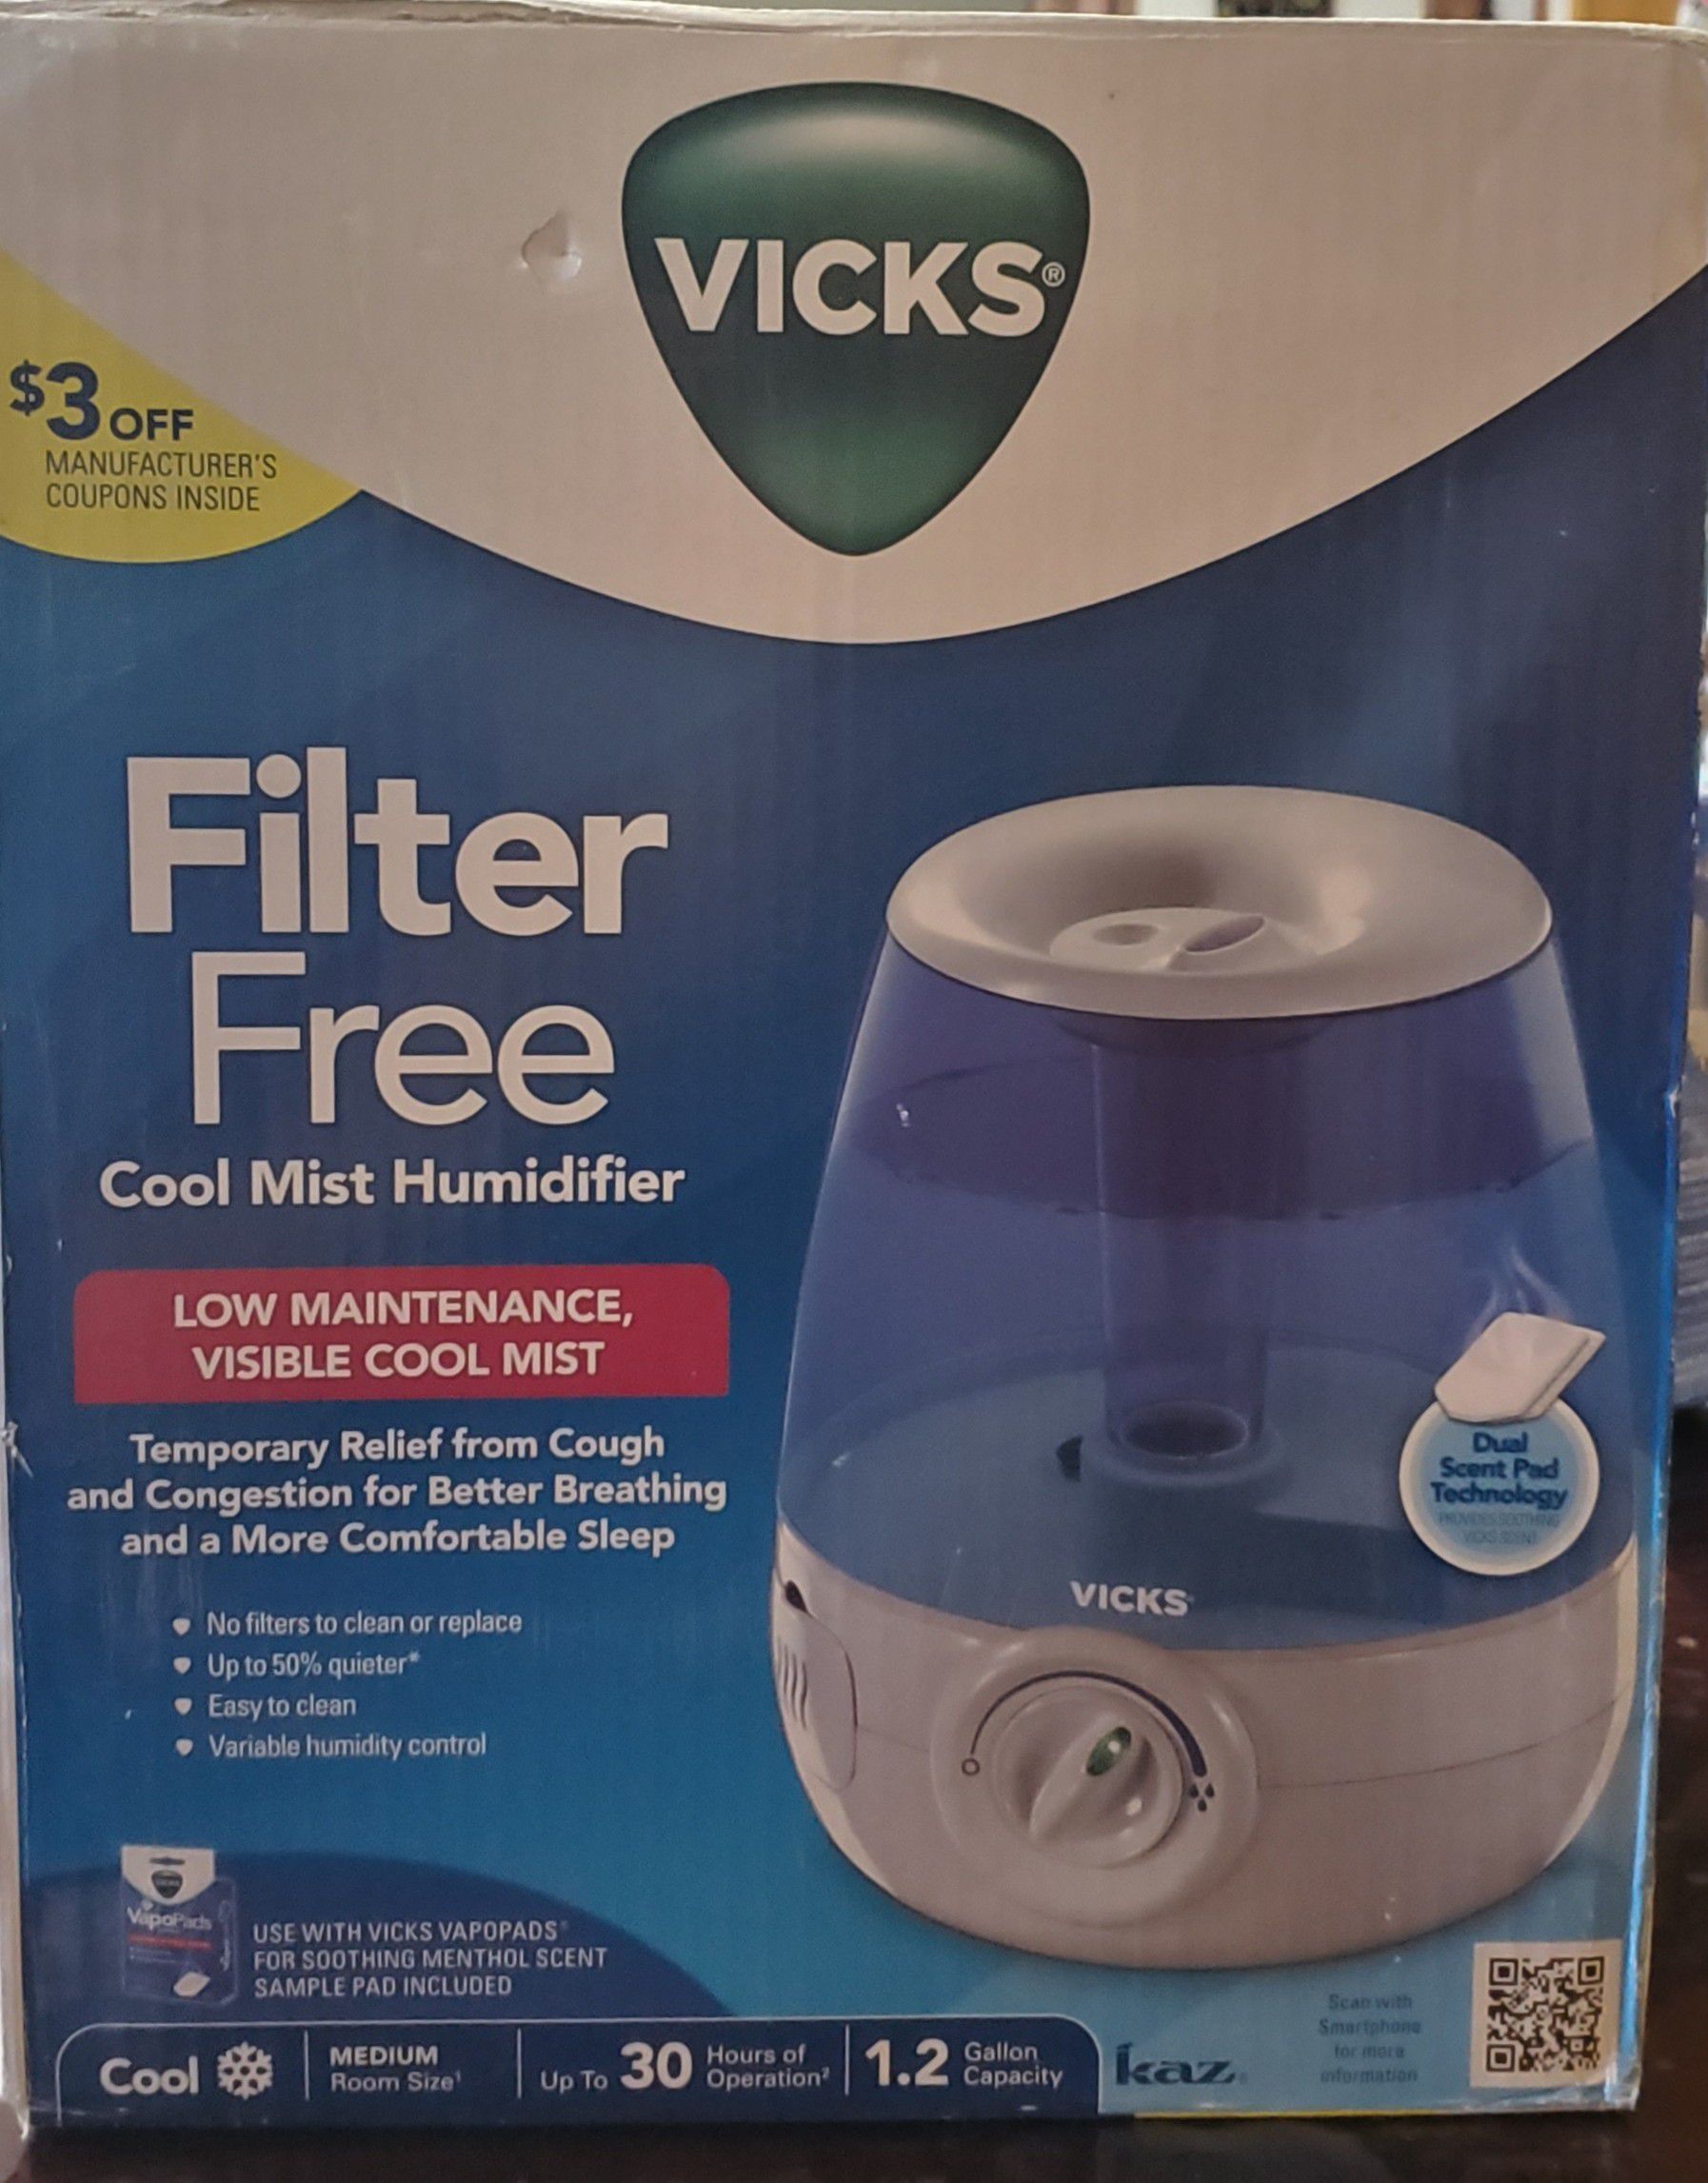 Filter free Cool Mist Humidifier